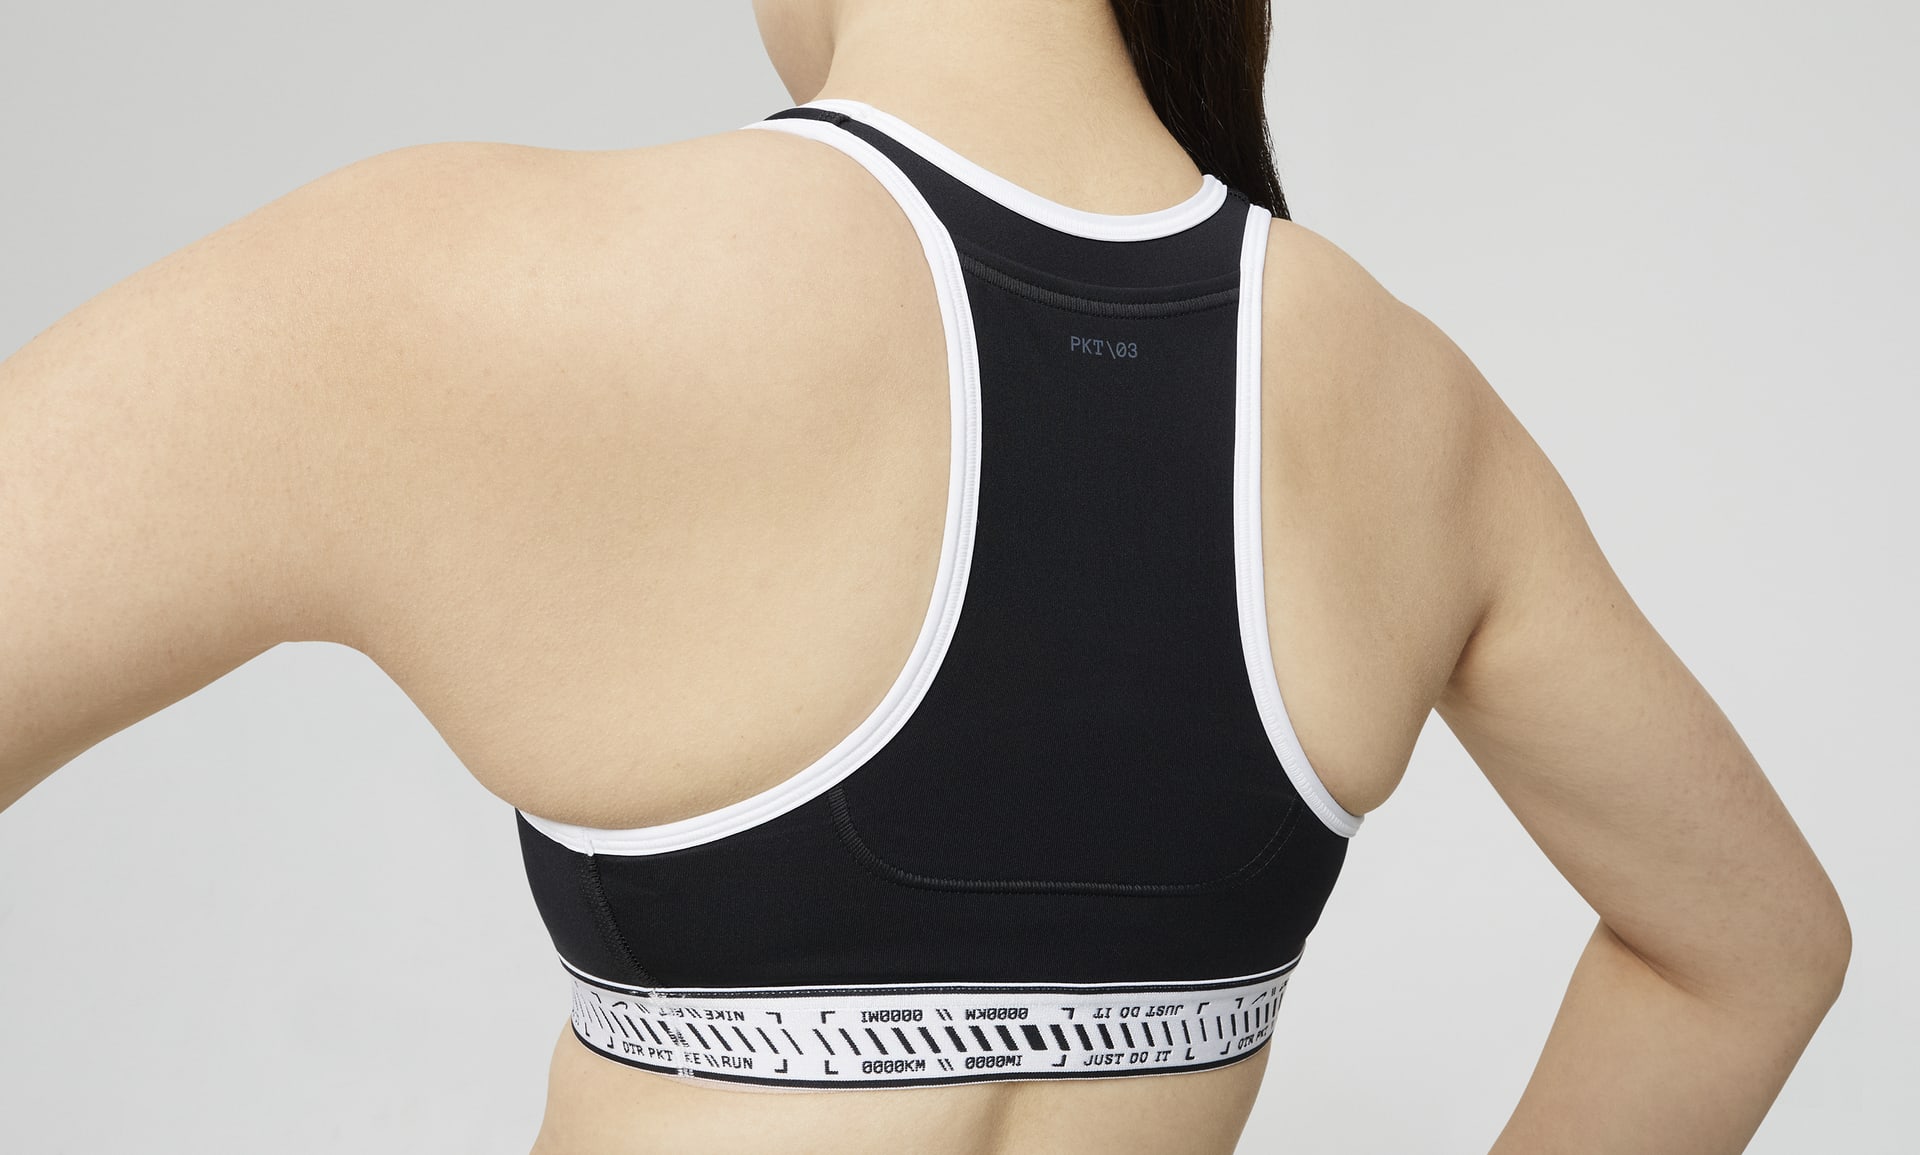 Nike Swoosh Pocket Bra - Women's for Sale, Reviews, Deals and Guides